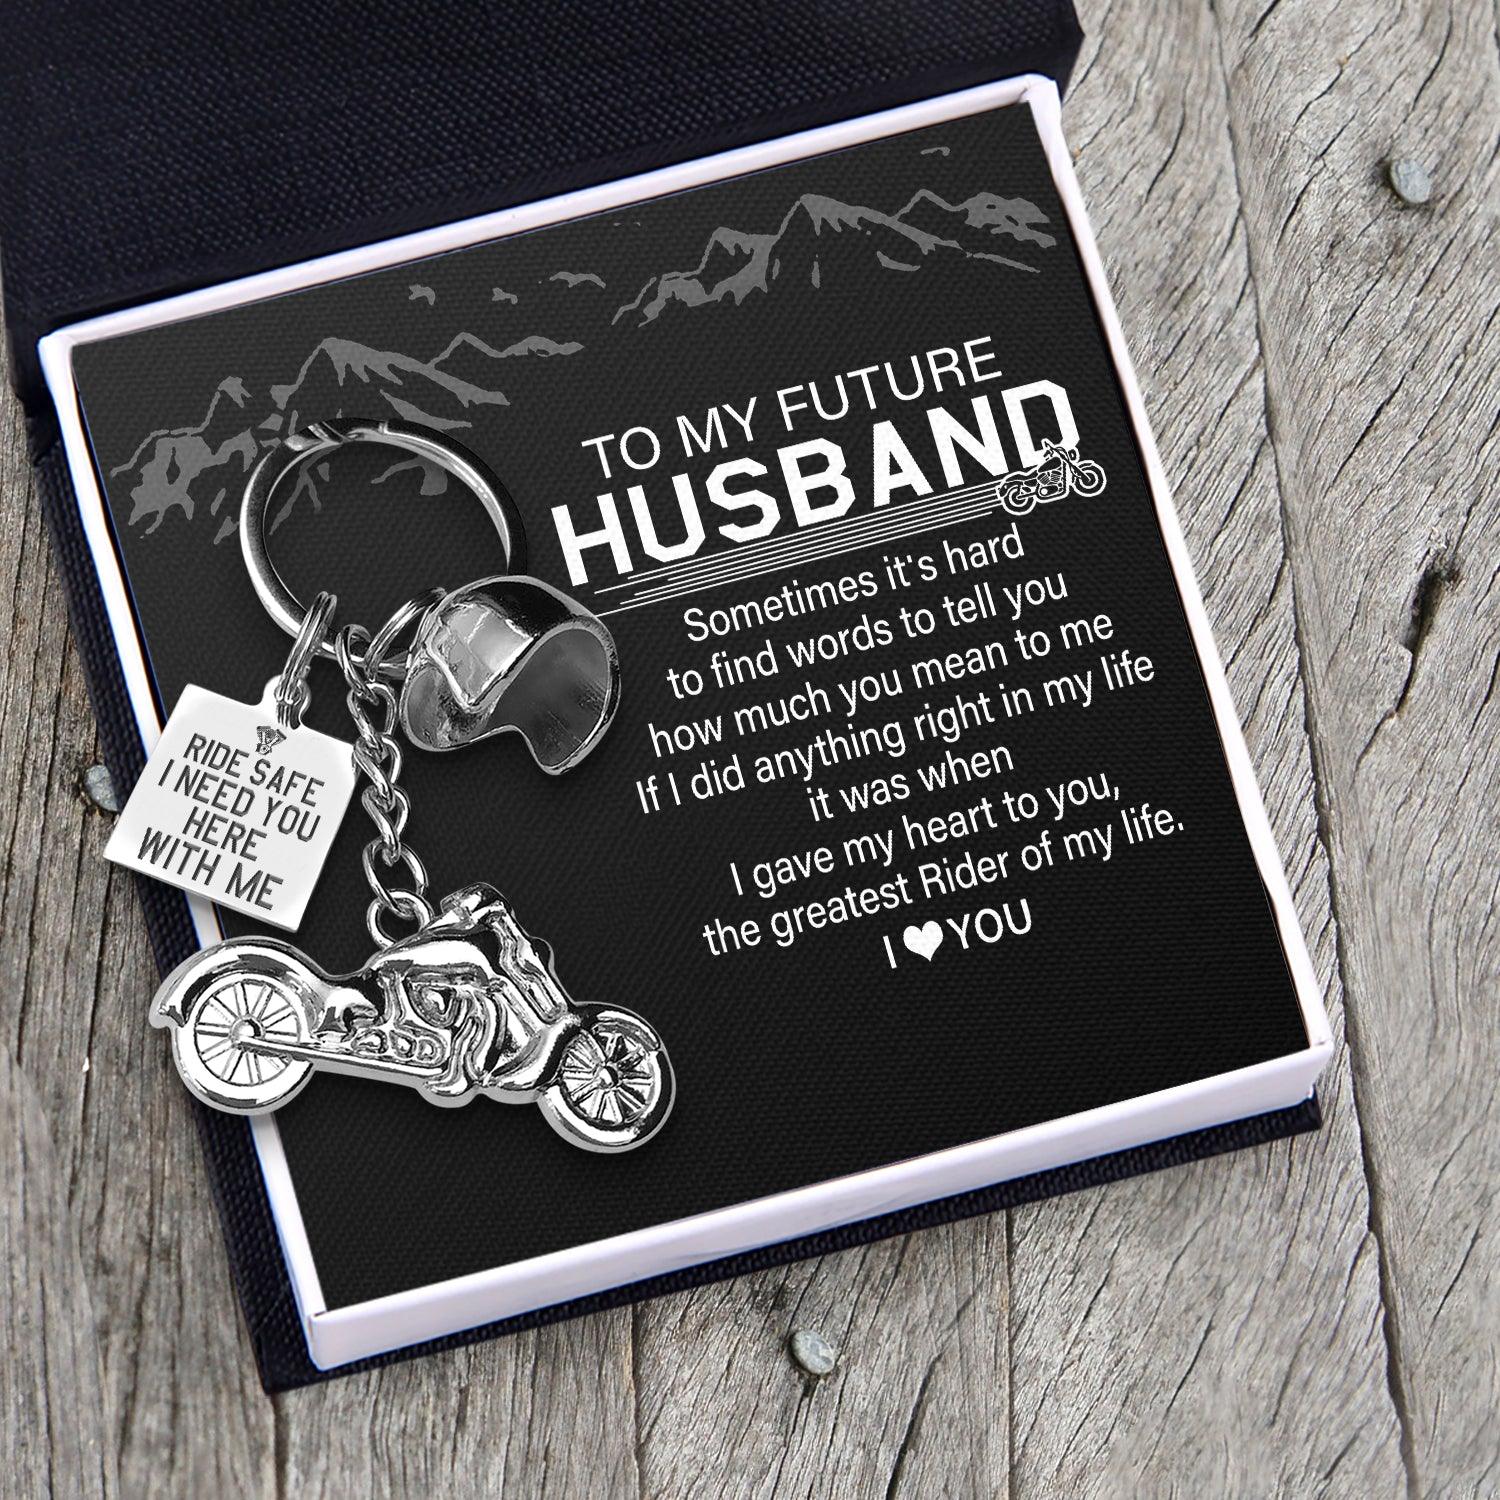 Classic Bike Keychain - To My Future Husband - The Greatest Rider Of My Life - Augkt24001 - Gifts Holder